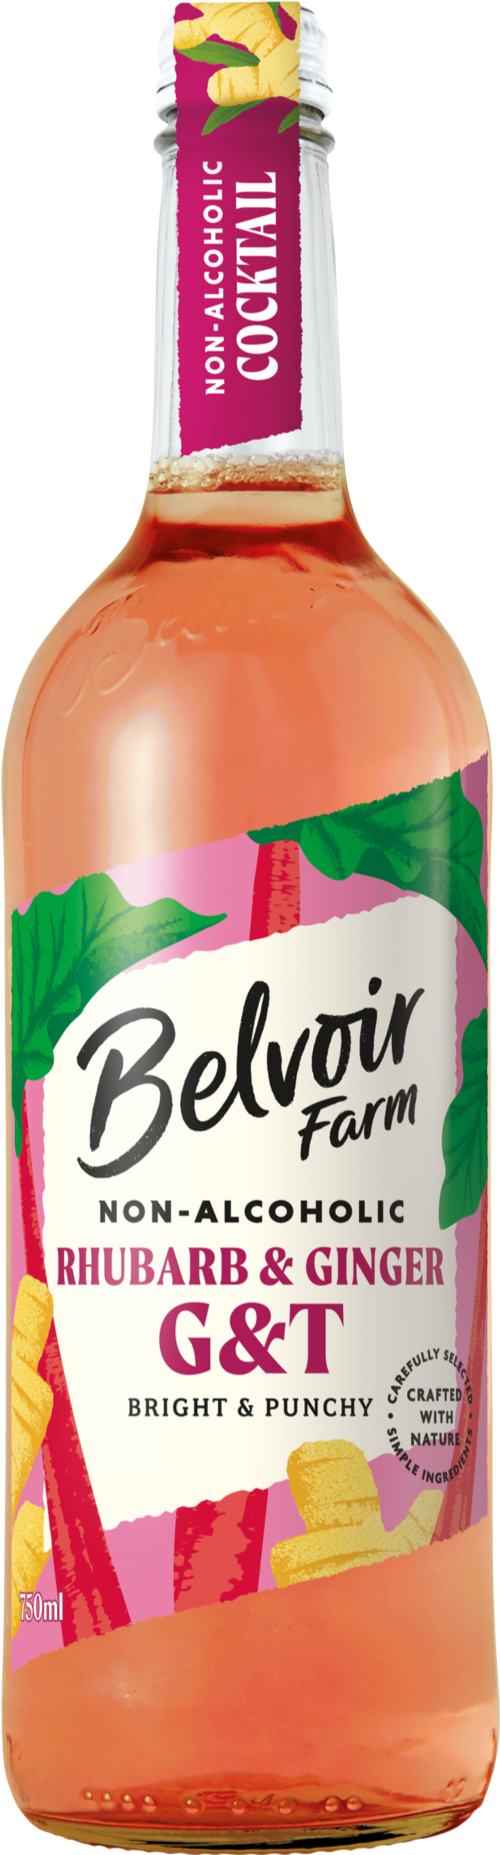 BELVOIR Non-Alcoholic Rhubarb & Ginger G&T 75cl